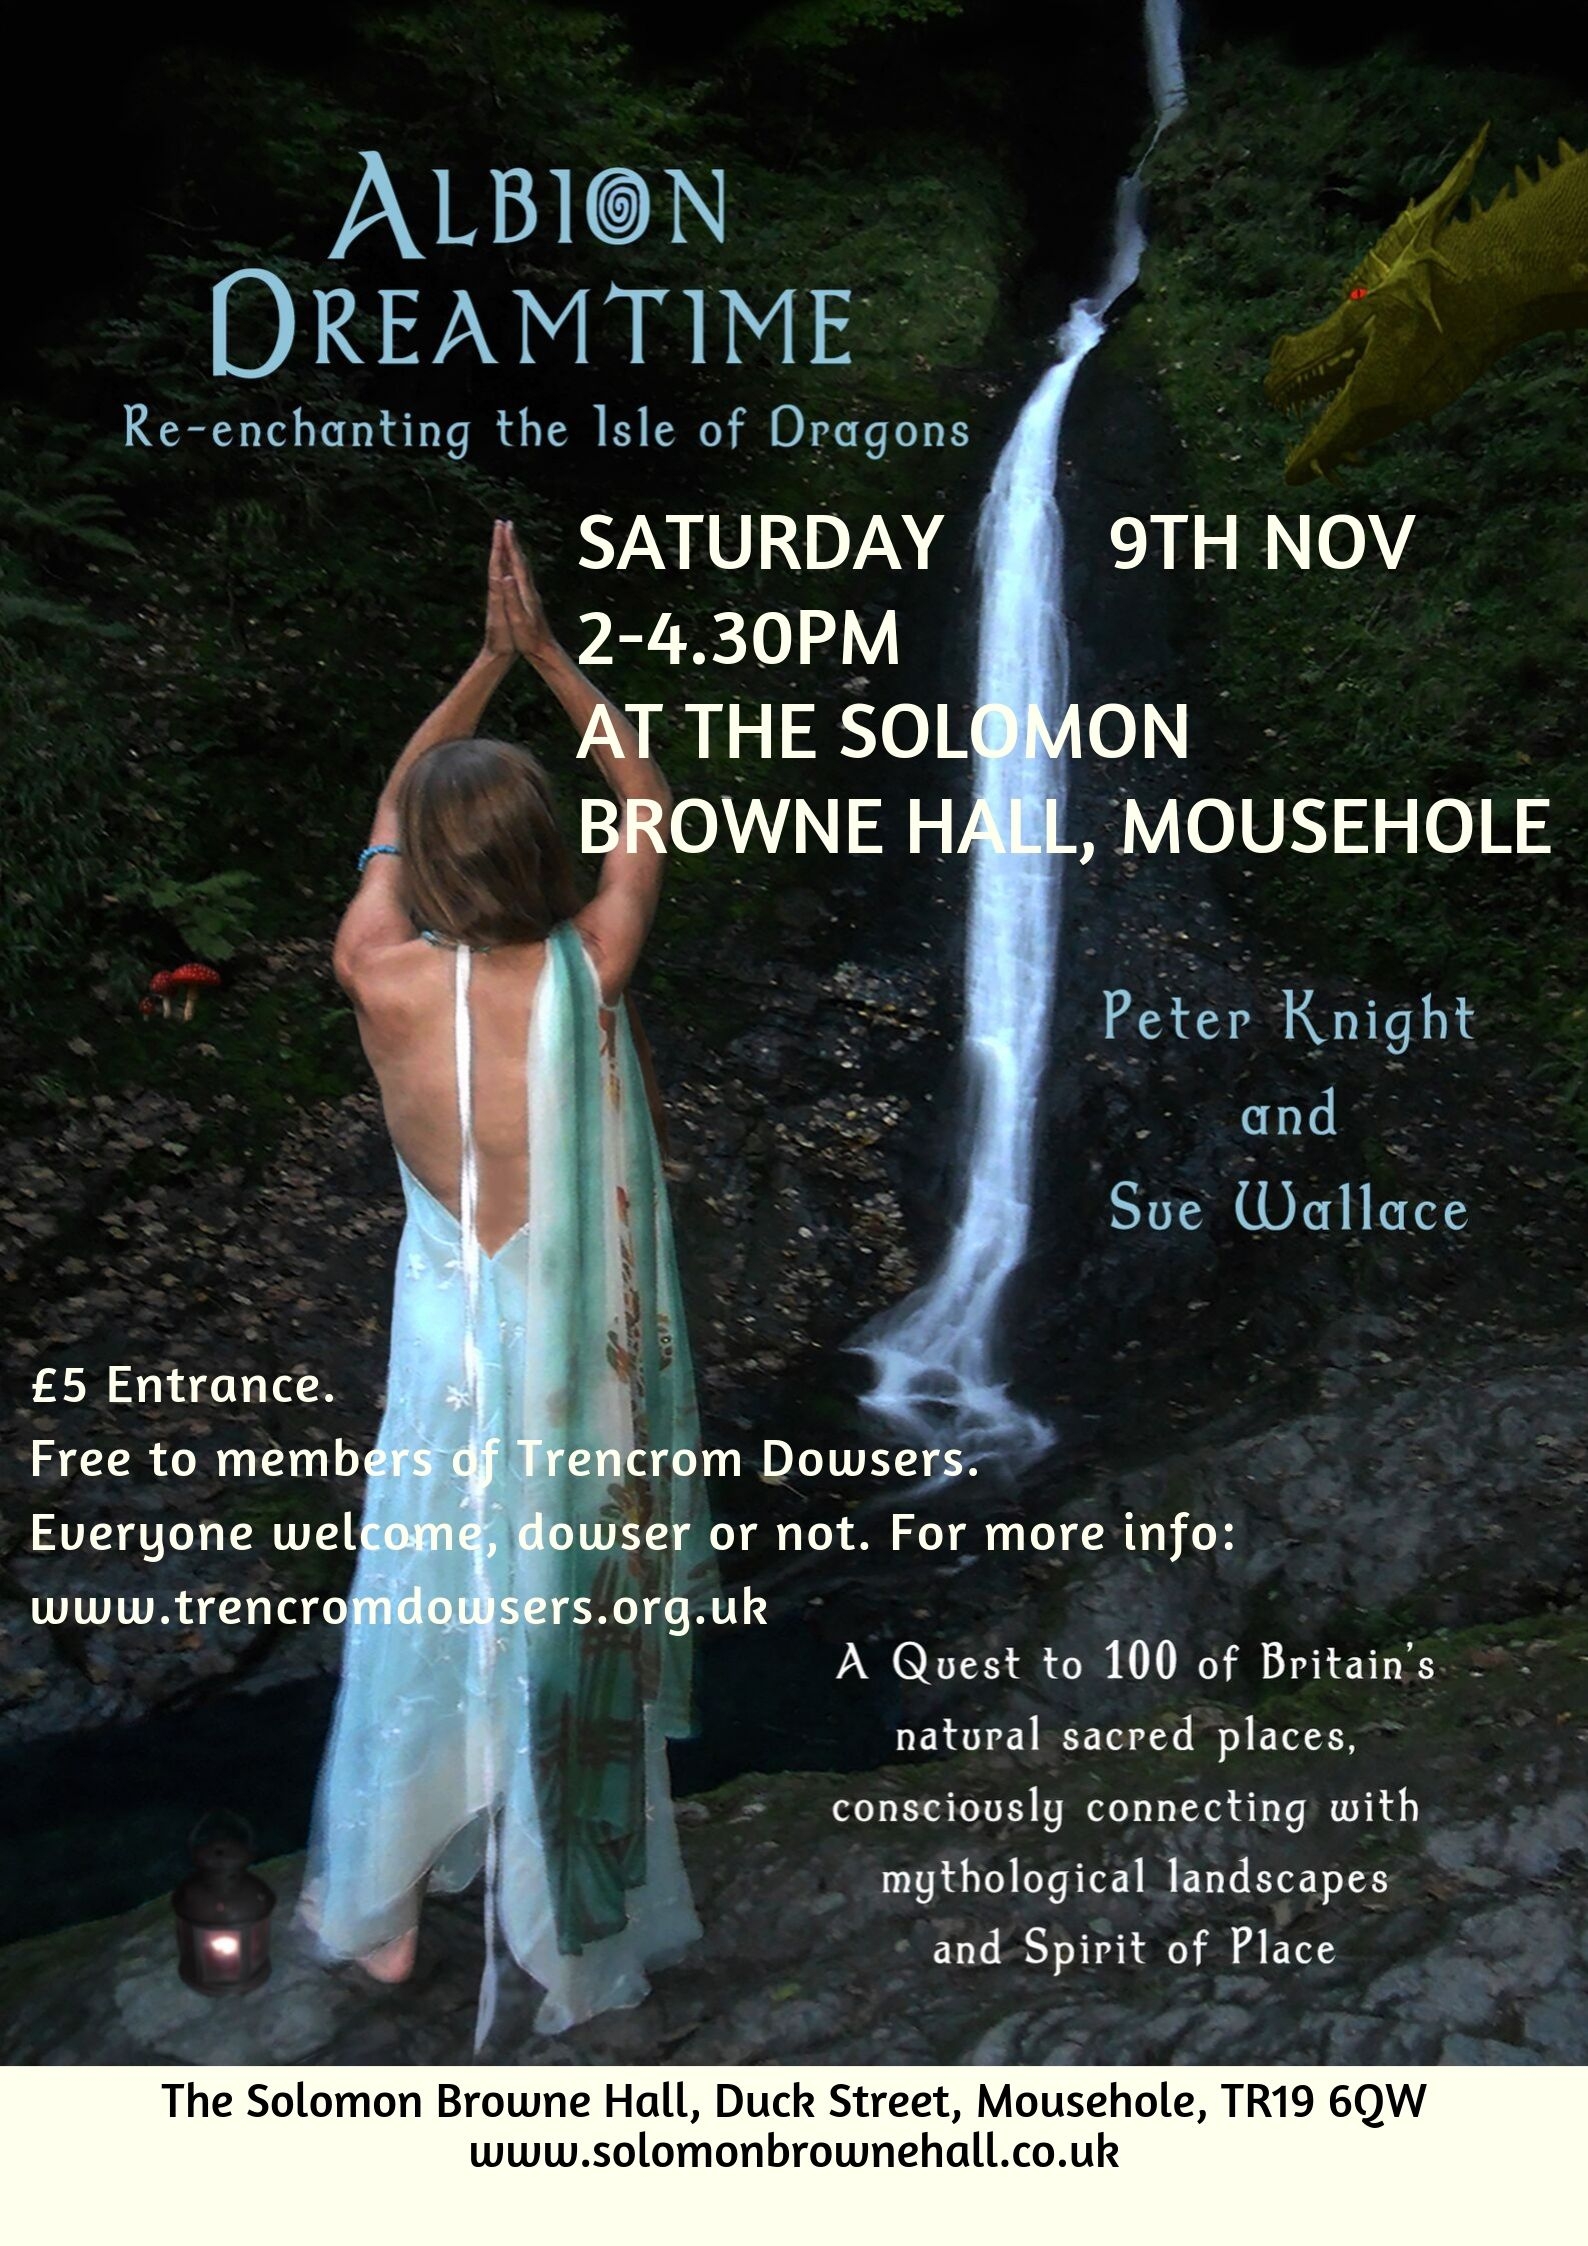 Albion Dreamtime - Re-enchanting the Isle of the Dragons